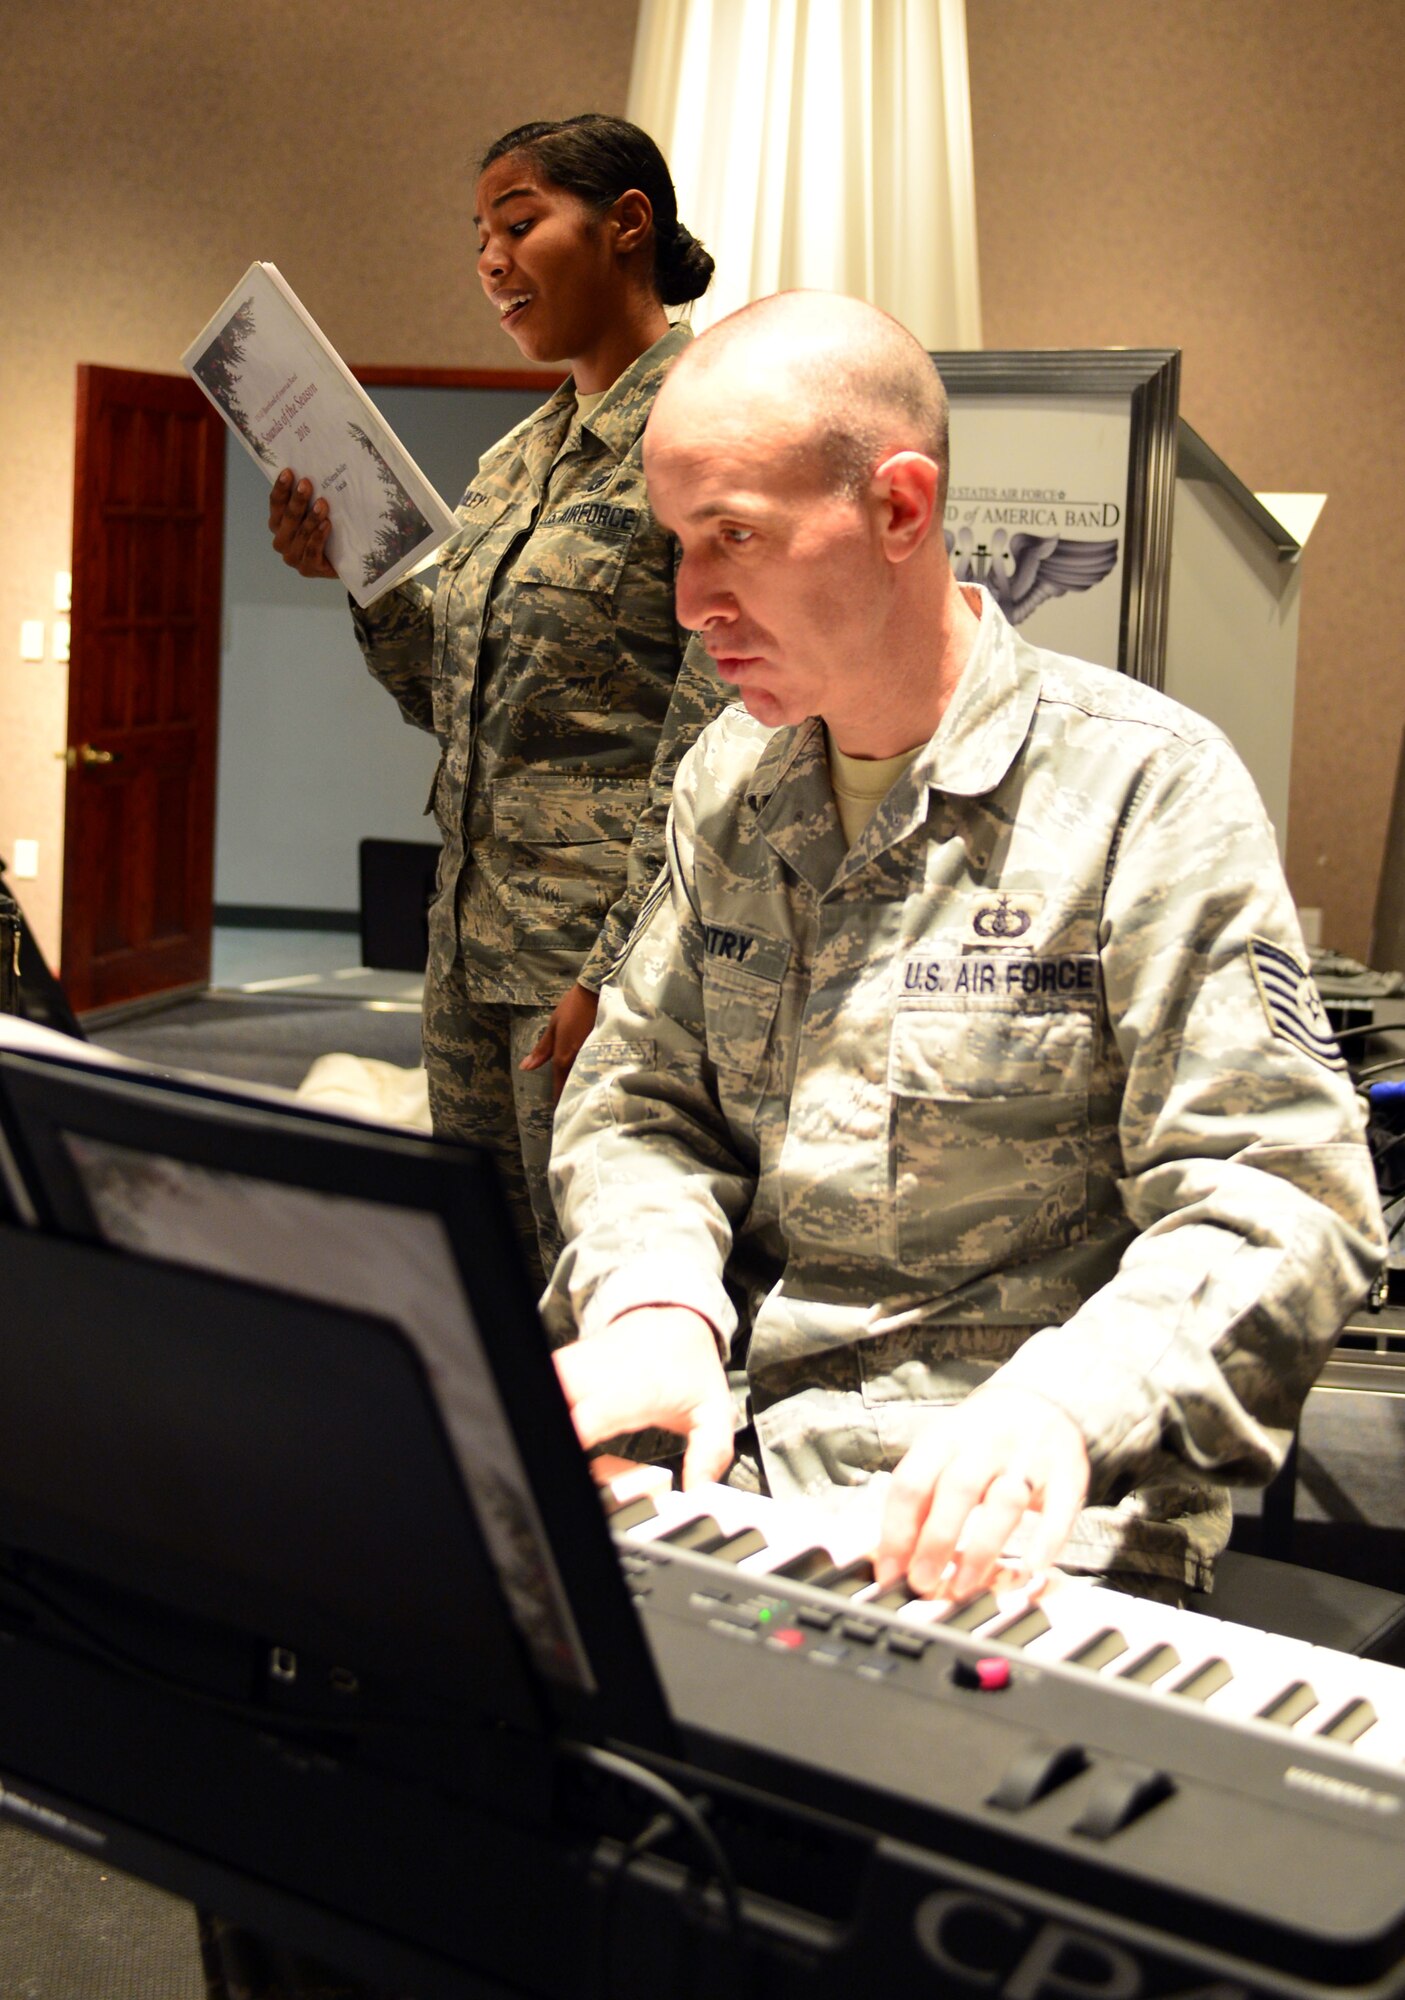 Heartland of America Band members Tech. Sgt. Marshall Gentry and Senior Airman Sierra Bailey rehearse Nov. 15, 2016 at Offutt Air Force Base in preparation for the band's upcoming holiday concert series. The 16-piece band is scheduled to conduct four free holiday-themed performances in the local community starting Dec. 10 and ending Dec. 18, 2016.The series will kick-off with a performance Dec. 10 at 2 p.m. at the Glenwood Community High School Performing Arts Center in Glenwood, Iowa and is presented in partnership with the Glenwood-Opinion Tribune and the Glenwood Community School District. The band will perform again Dec. 16 at 7:30 p.m.; Dec. 17 at 7:30 p.m. and Dec. 18 at 2 p.m. at Bellevue East High School in Bellevue, Nebraska in the school’s auditorium and is presented in partnership with Suburban Newspapers. Information on how to get tickets for these free concerts will be posted soon on the band's website (www.heartlandofamericaband.af.mil) and Facebook page (search for USAF Heartland of America Band) as well as in ads in the Omaha World-Herald, Bellevue Leader and Glenwood Opinion-Tribune newspapers.